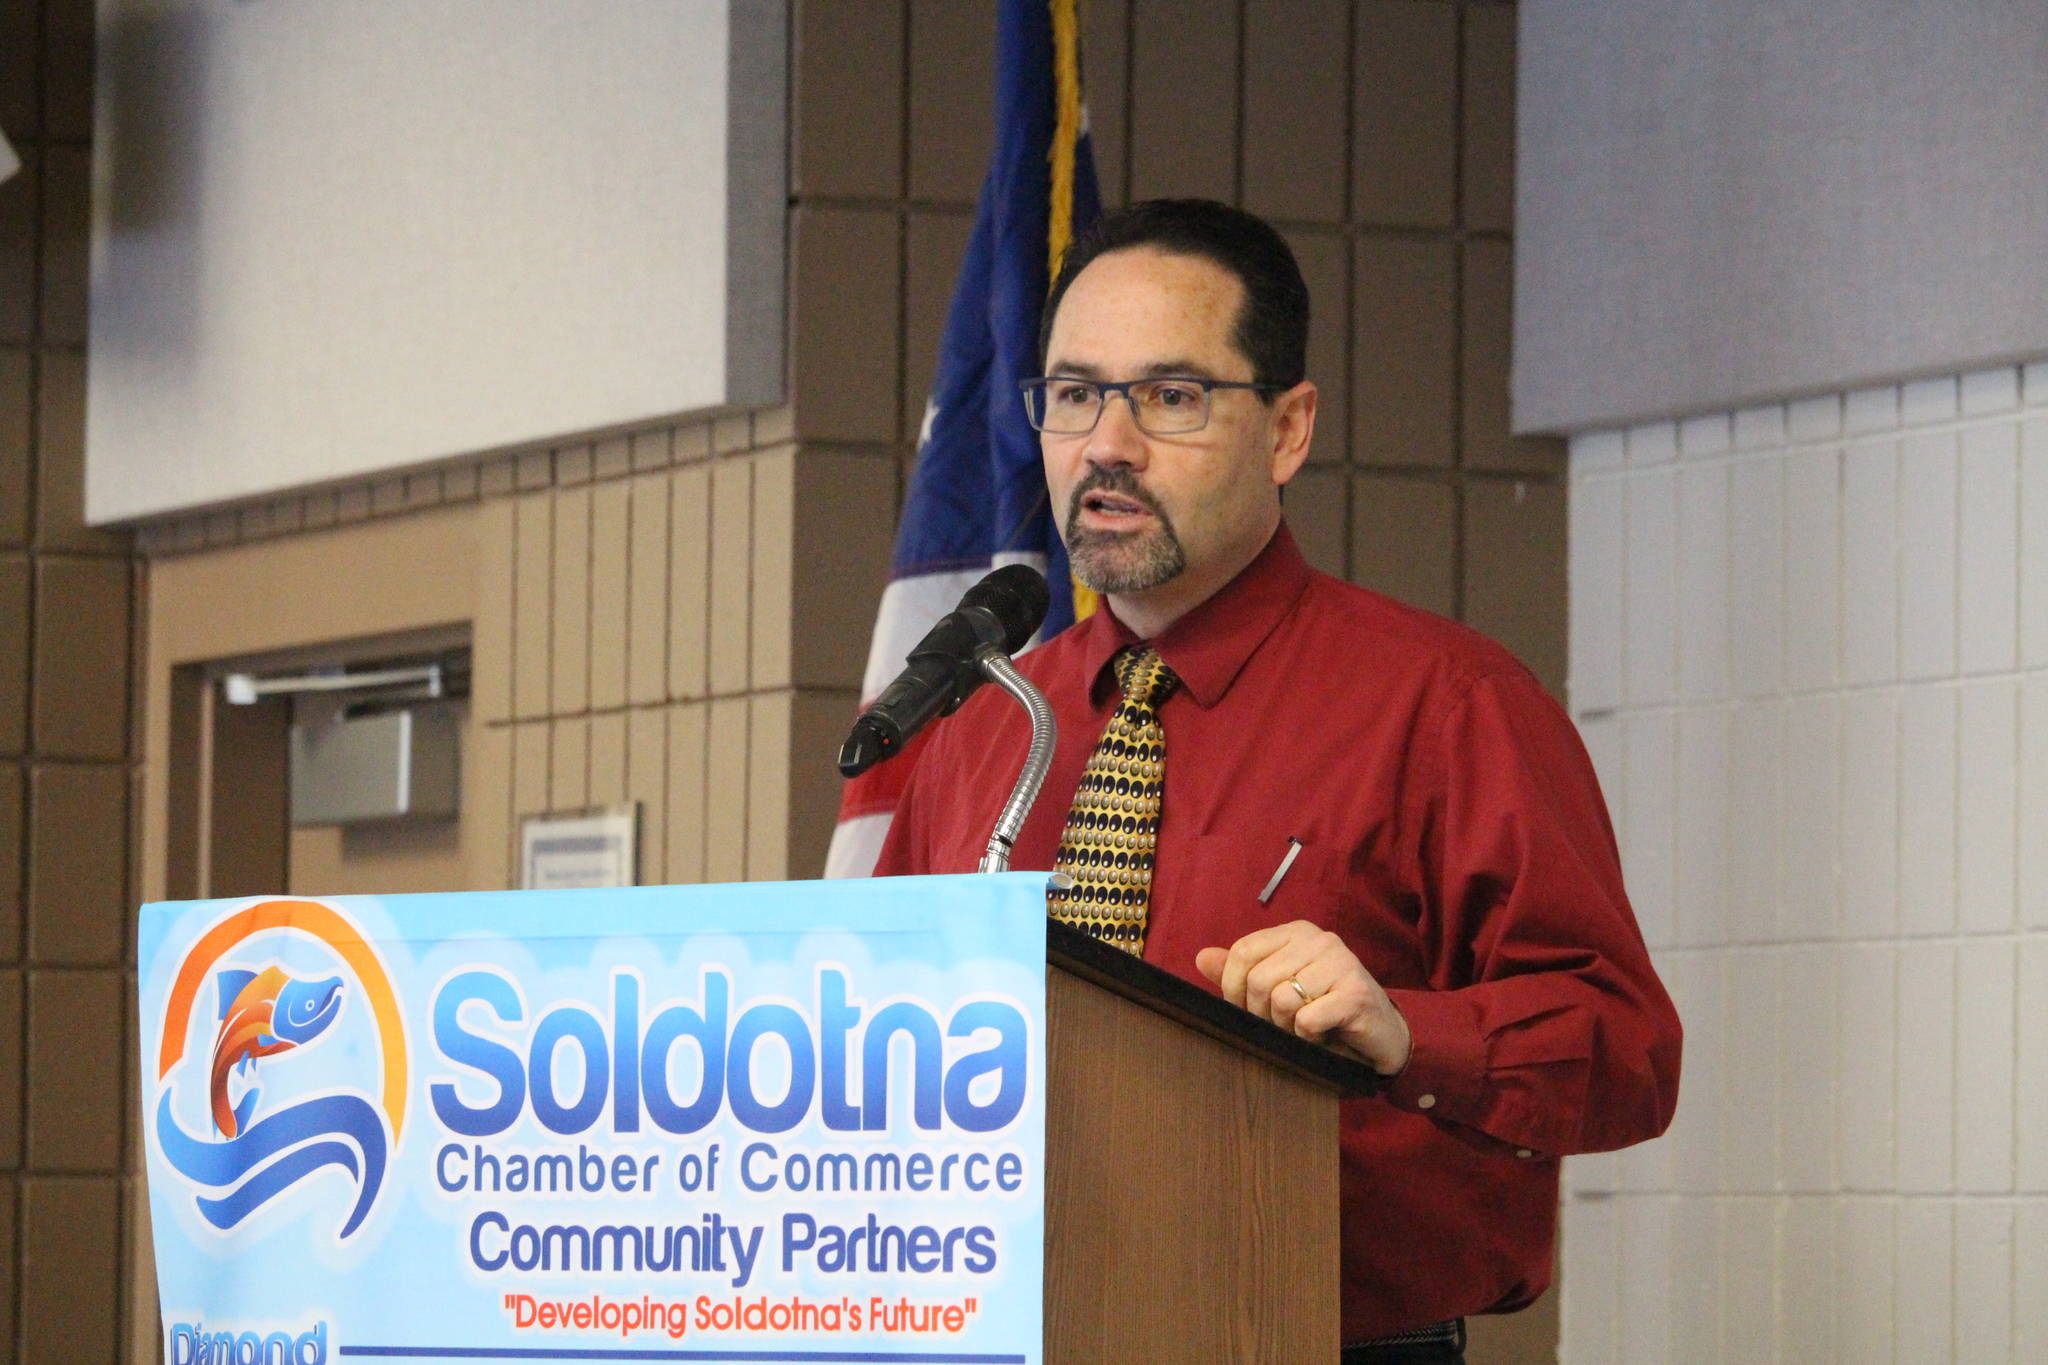 John O’Brien, superintendent for the Kenai Peninsula School District, gives a presentation to the Soldotna Chamber of Commerce at the Soldotna Regional Sports Complex in Soldotna, Alaska, on Wednesday, Jan. 22, 2020. (Photo by Brian Mazurek/Peninsula Clarion)